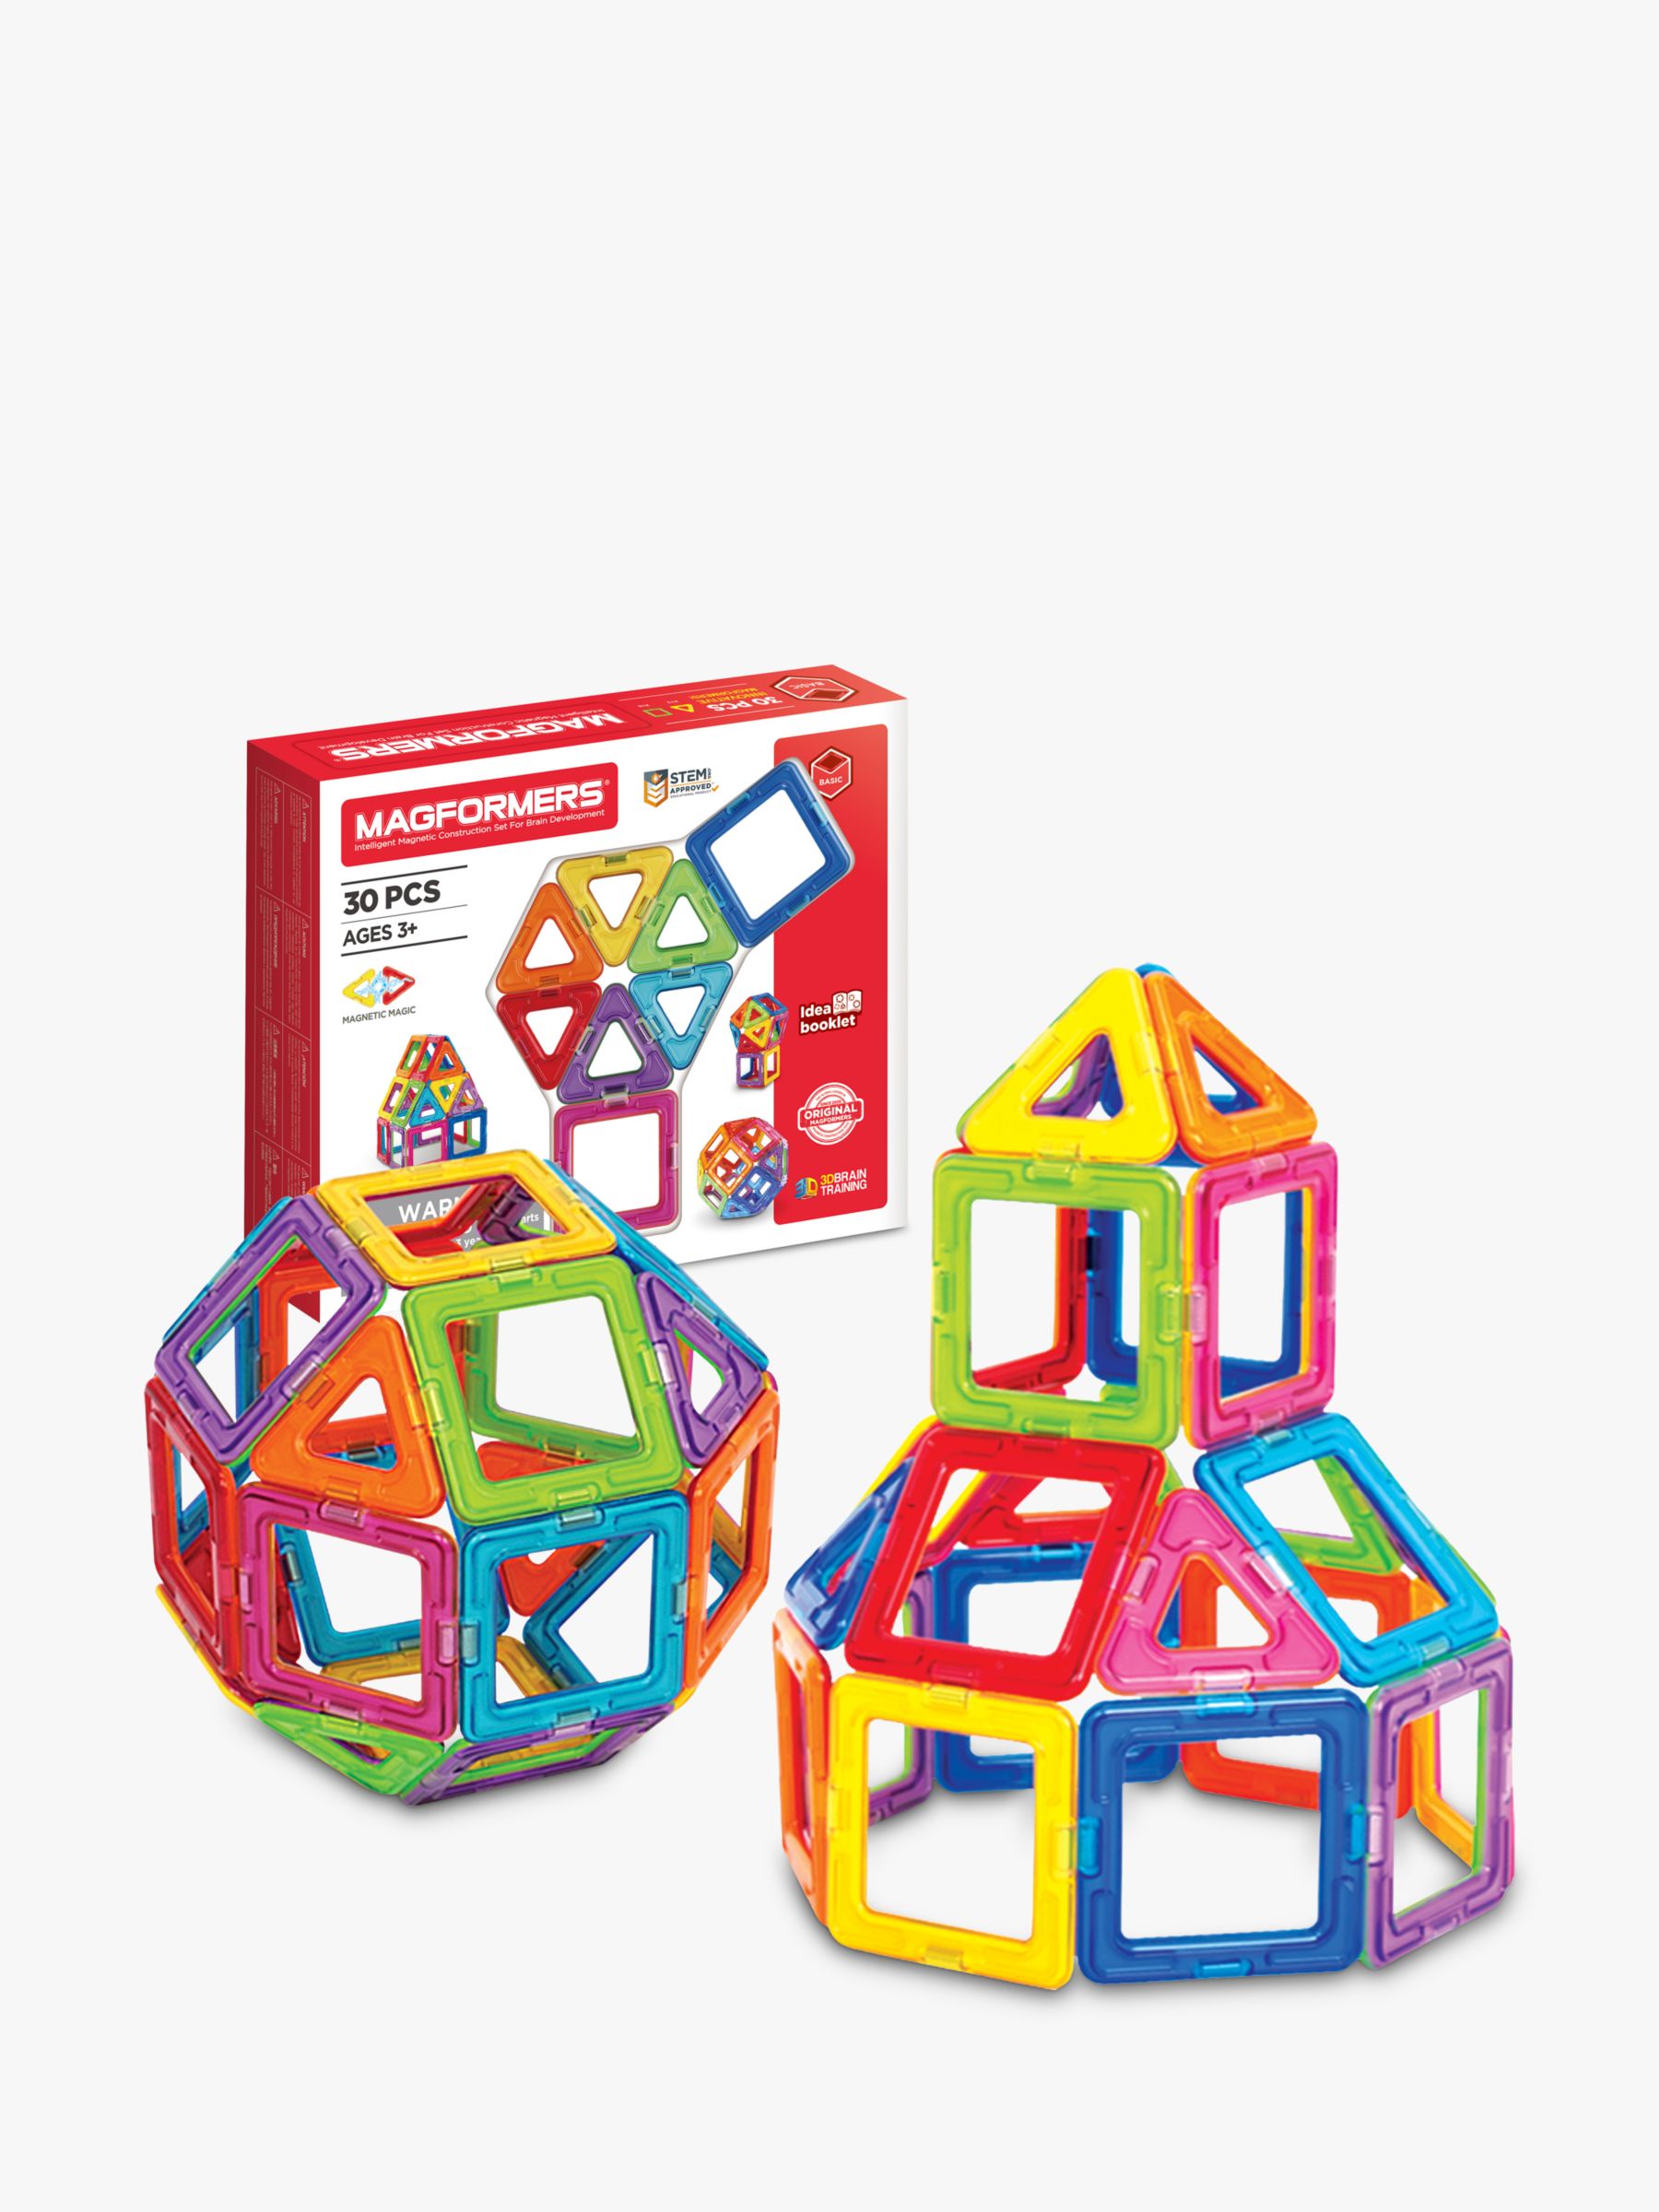 Magformers 30 Piece Construction